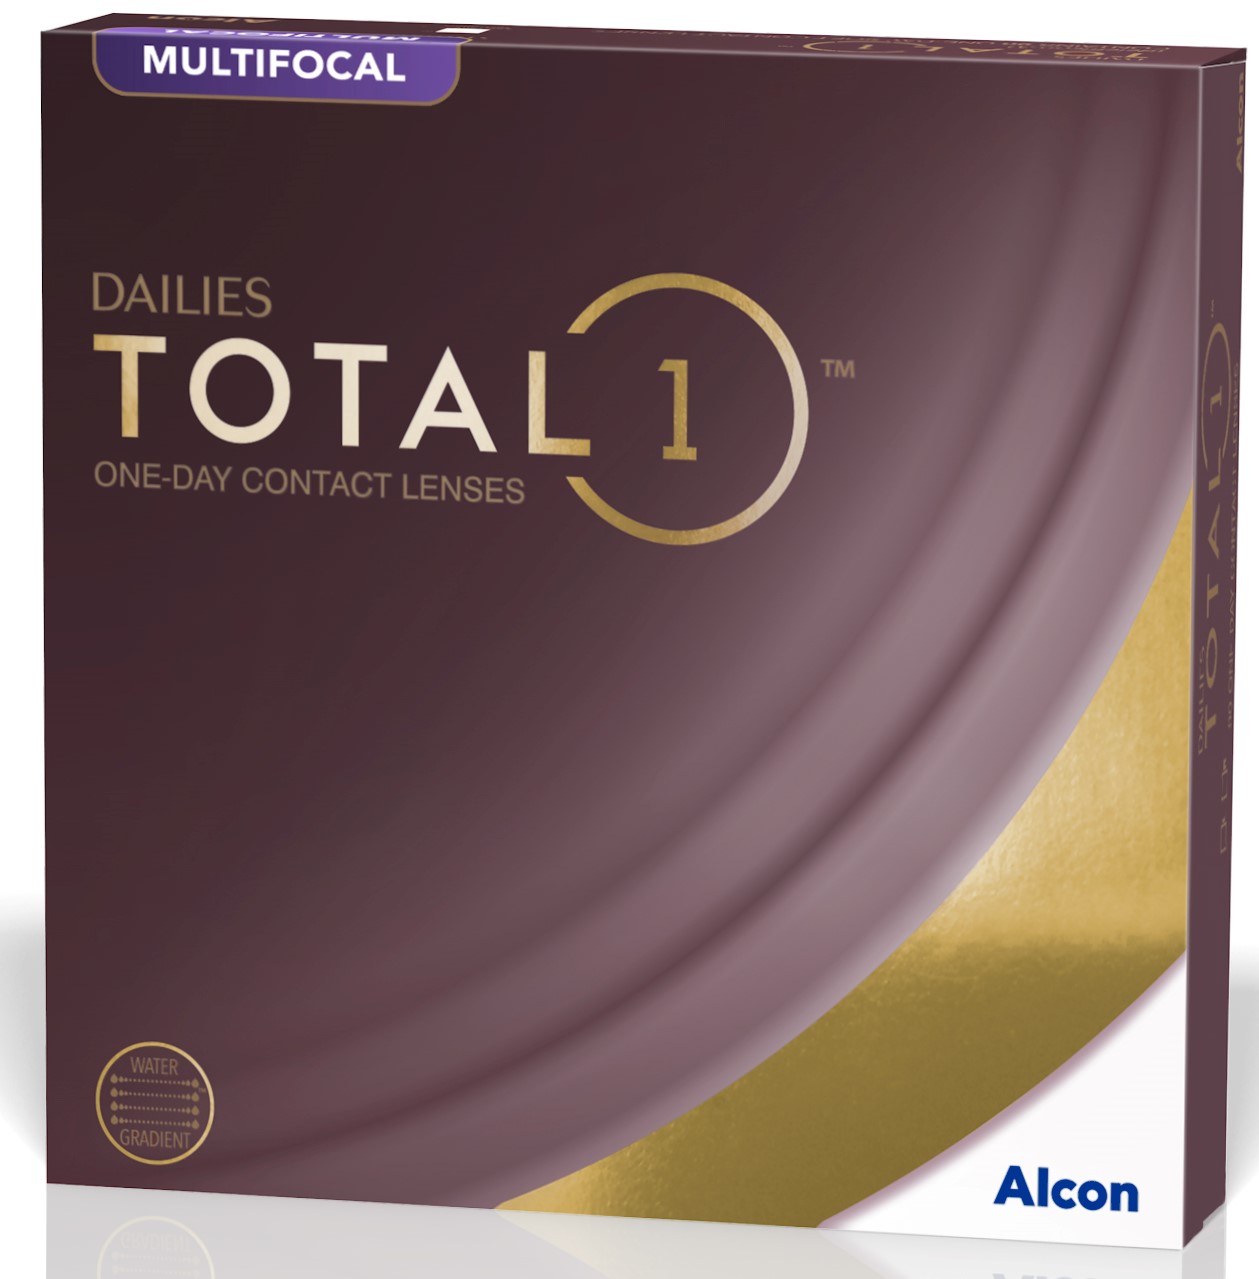 Alcon Dailies Total1 Multifocal Visique Optometrists